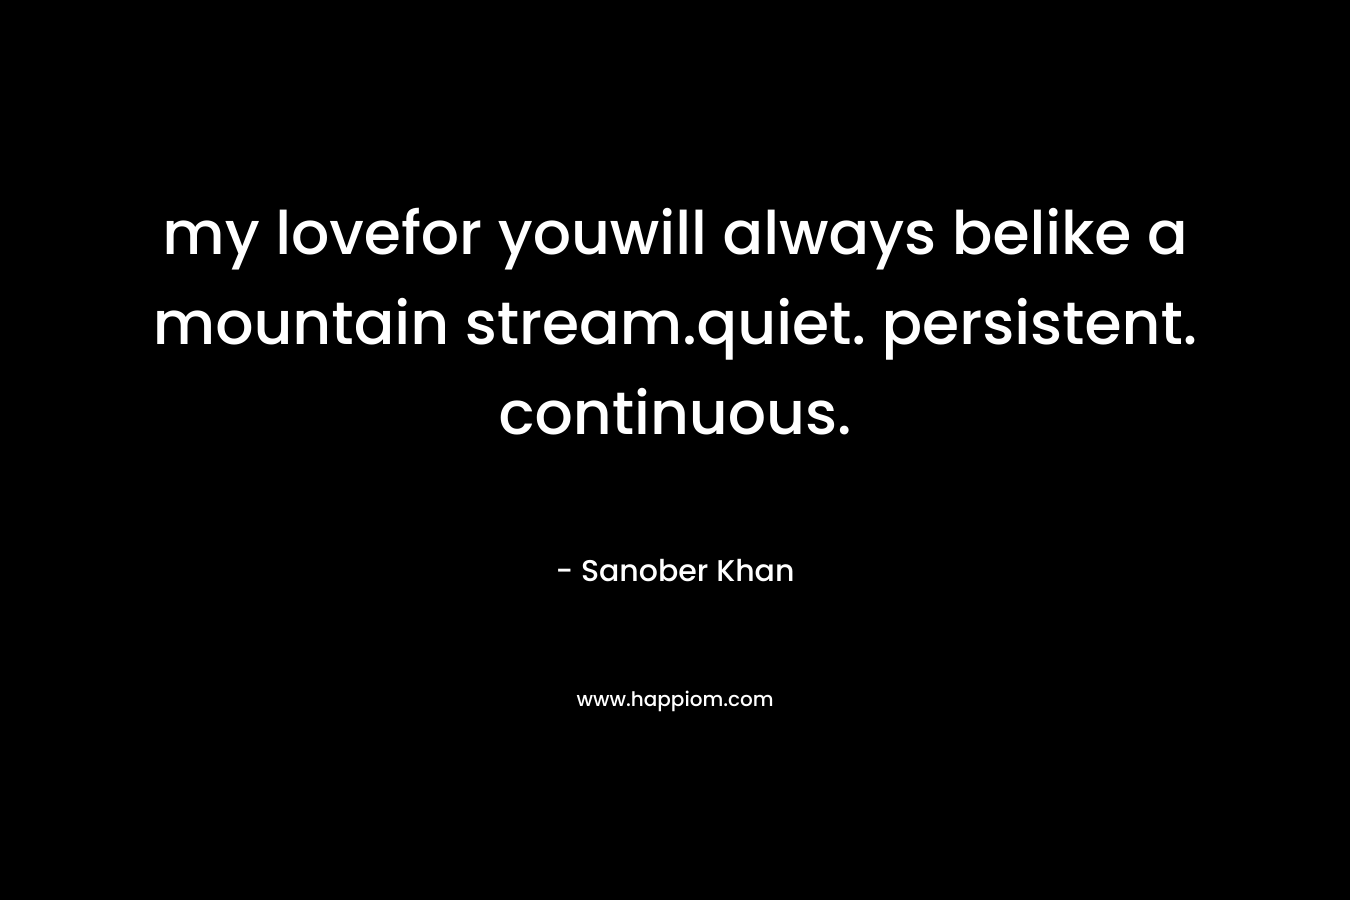 my lovefor youwill always belike a mountain stream.quiet. persistent. continuous.